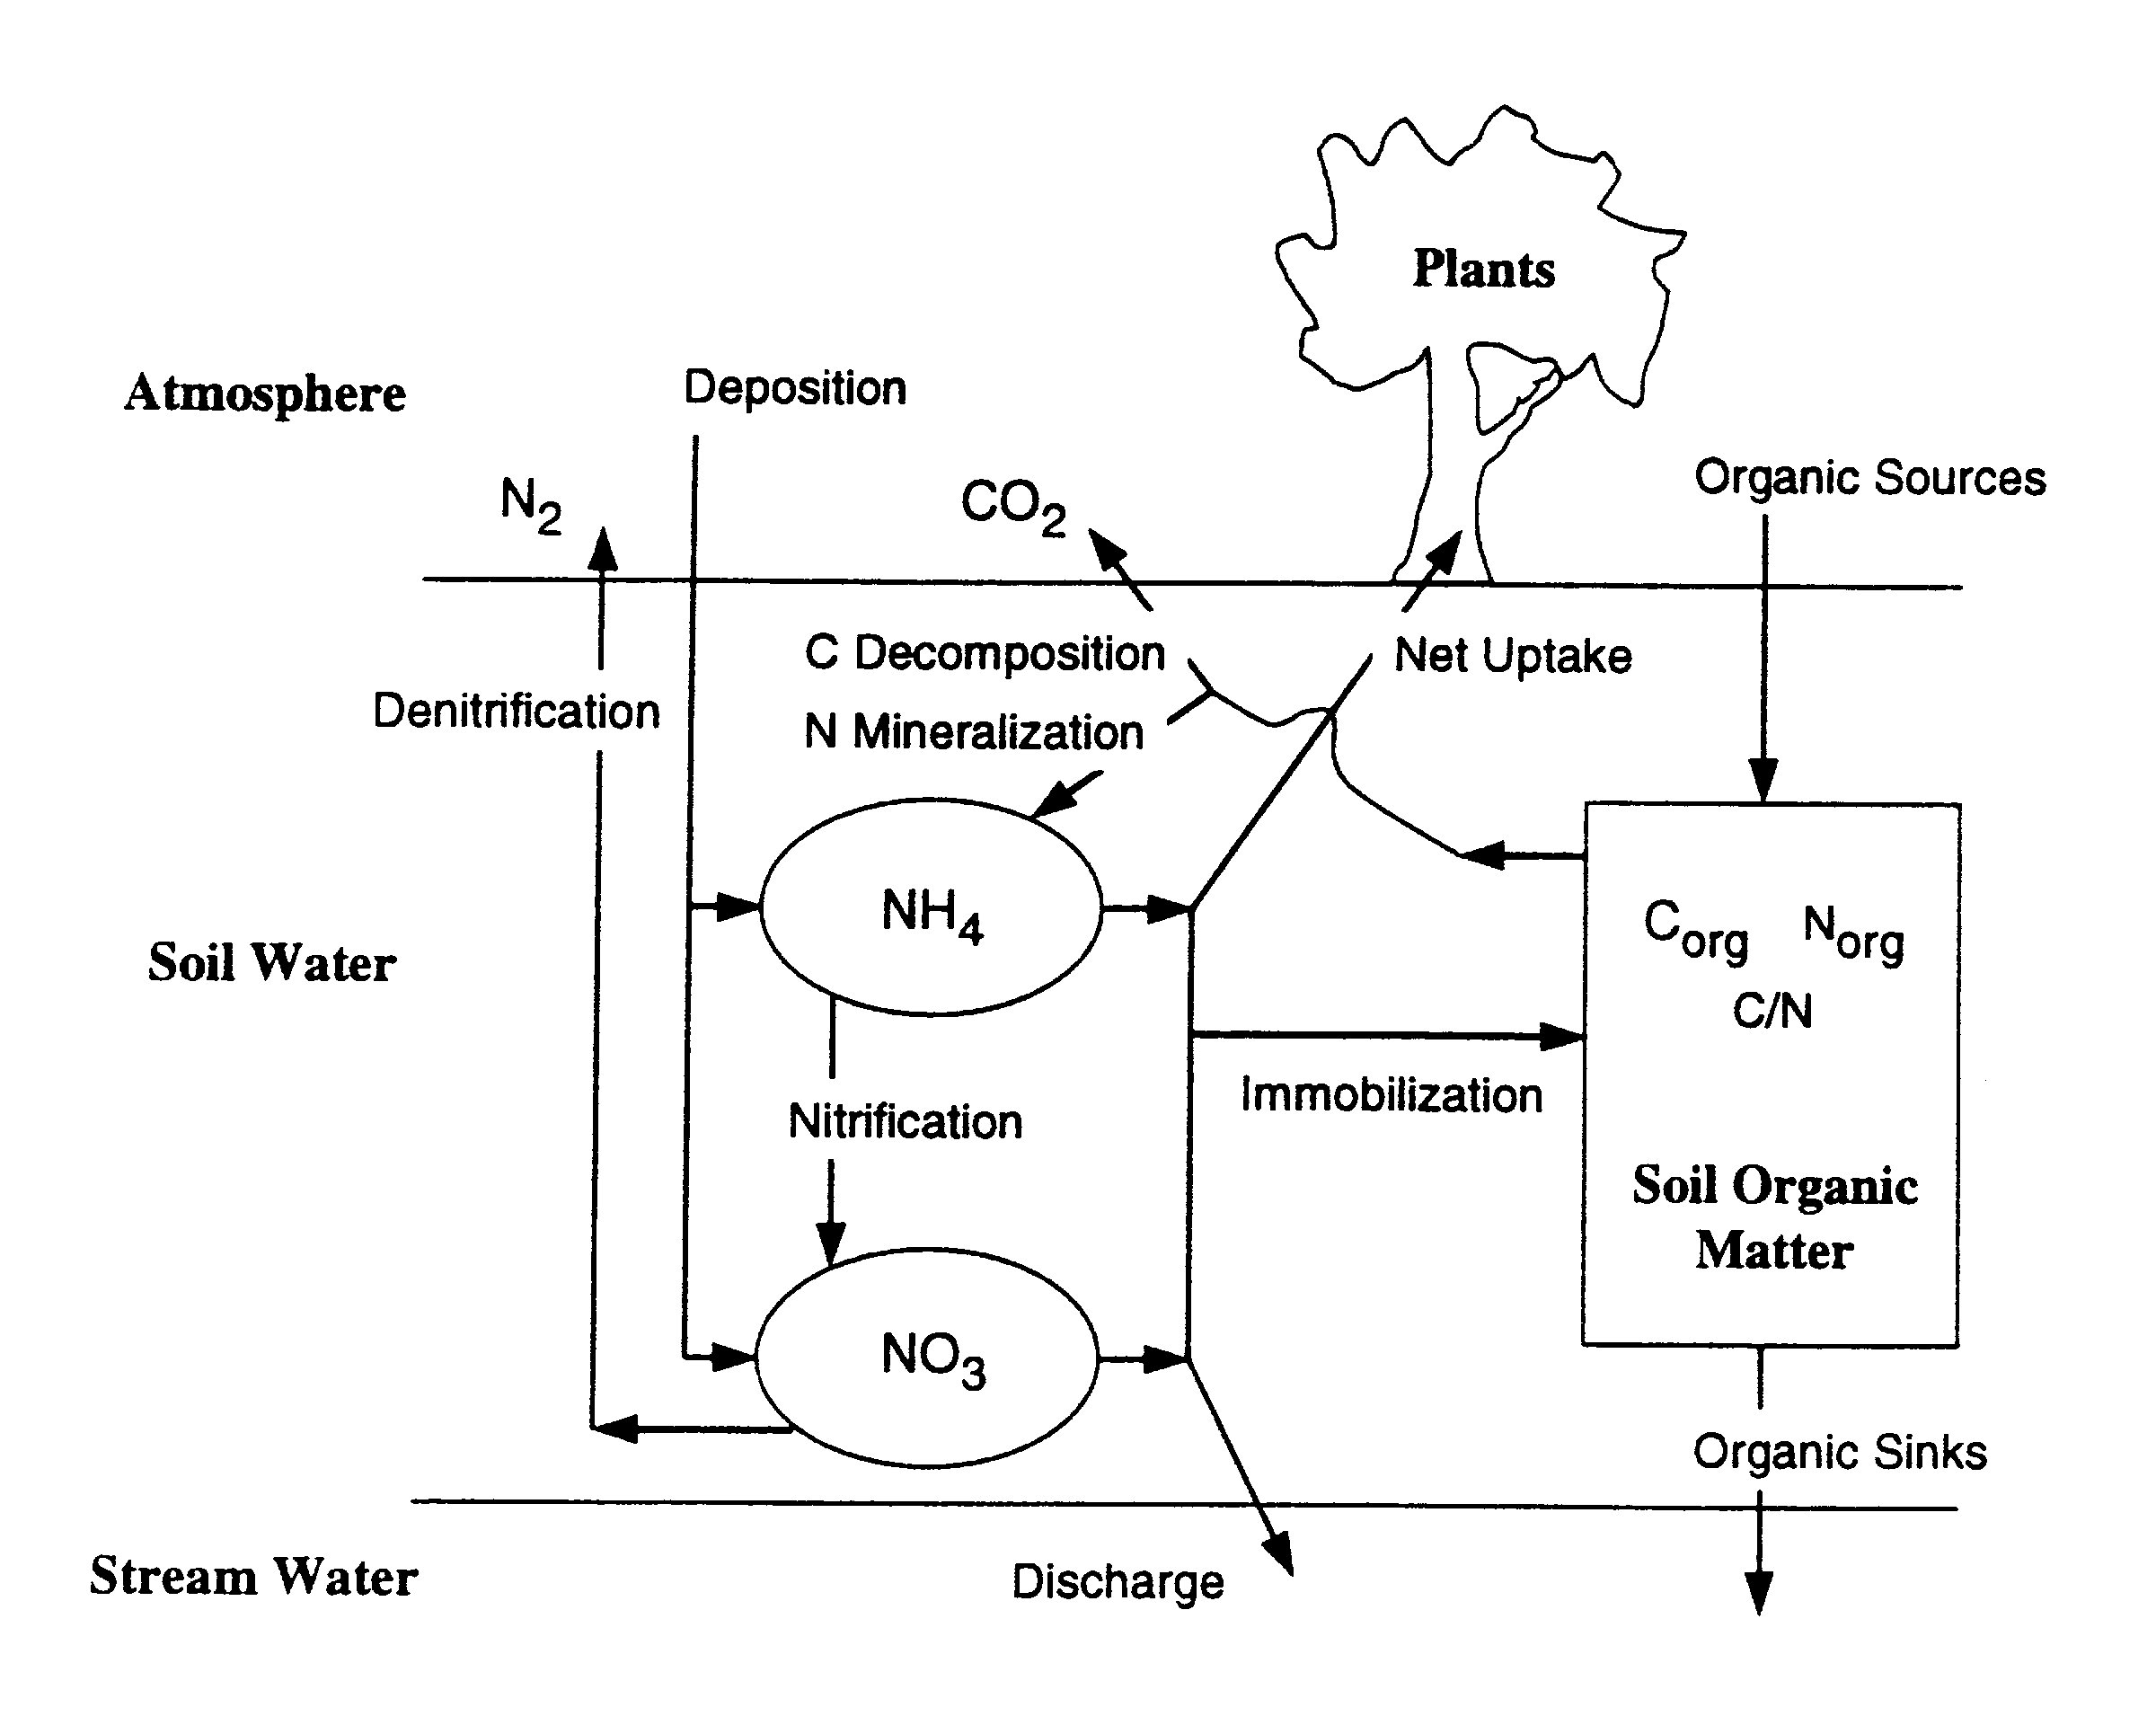 Figure 2 Schematic illustration of the pools and fluxes included in MAGIC for use in simulating the dynamics of organic and inorganic nitrogen in soils